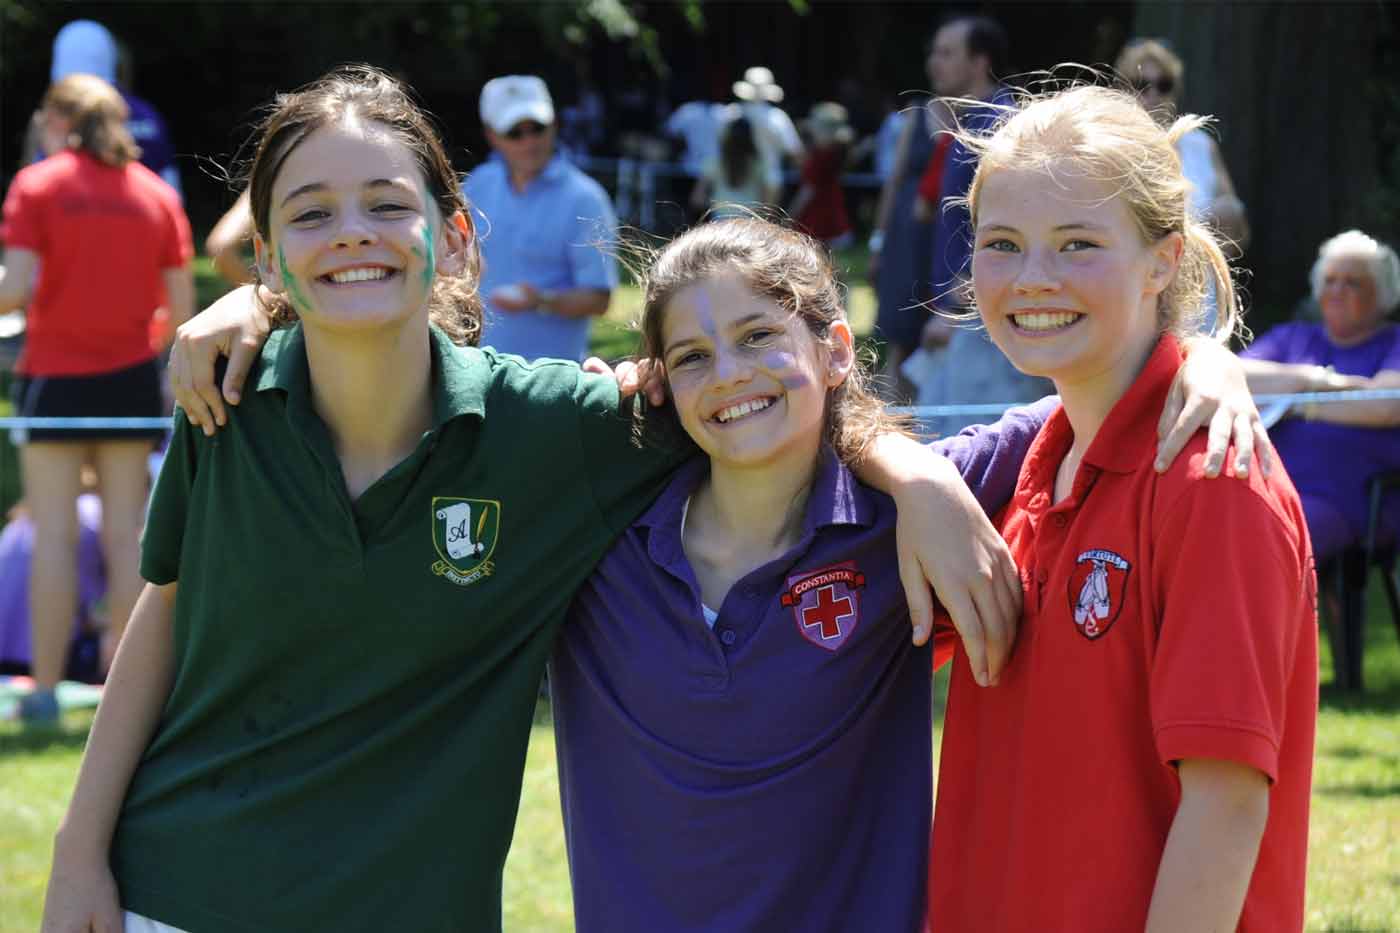 Sports Day 2017 celebrated in glorious sunshine